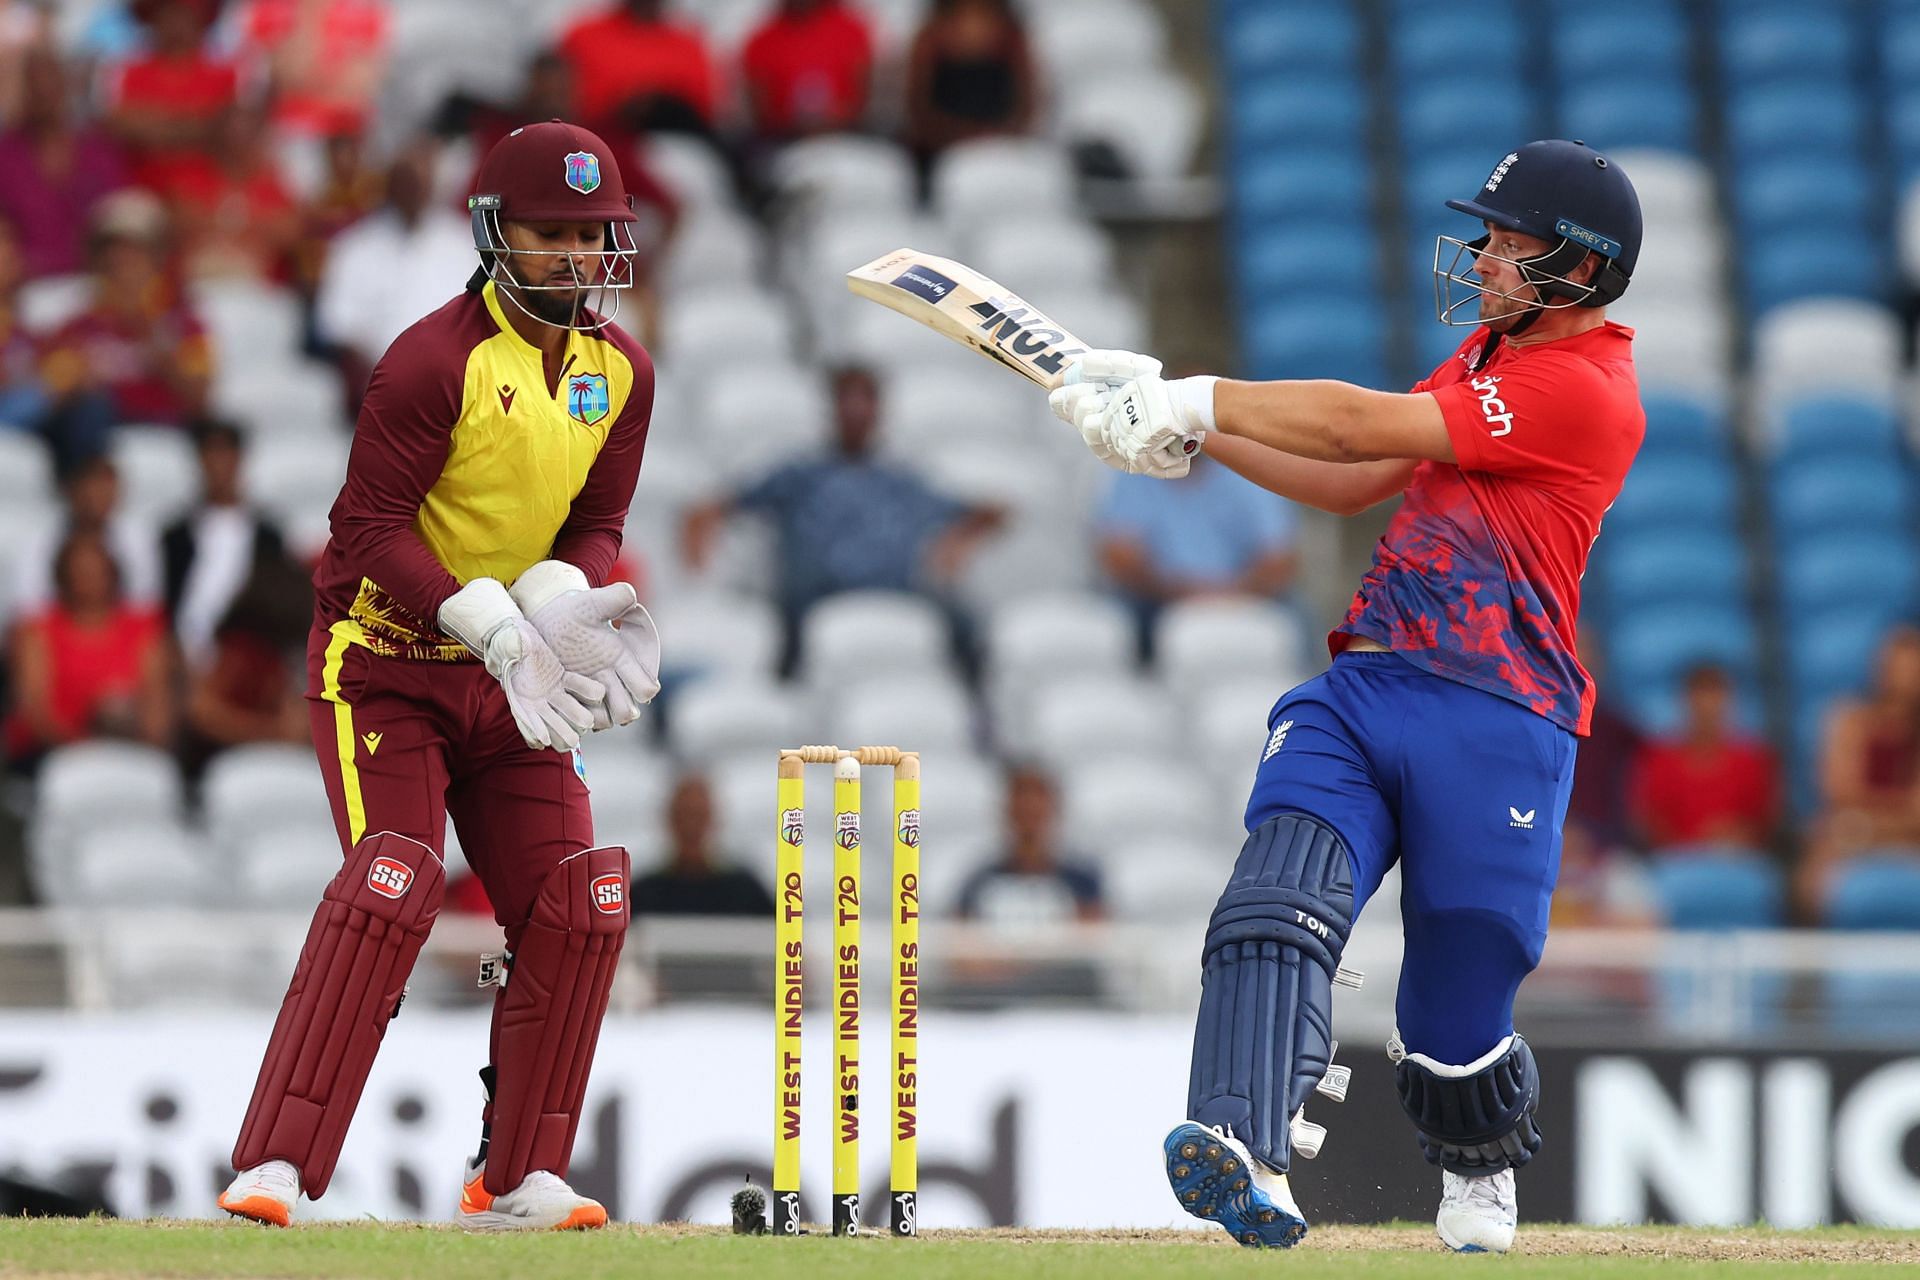 West Indies vs England - 4th T20I